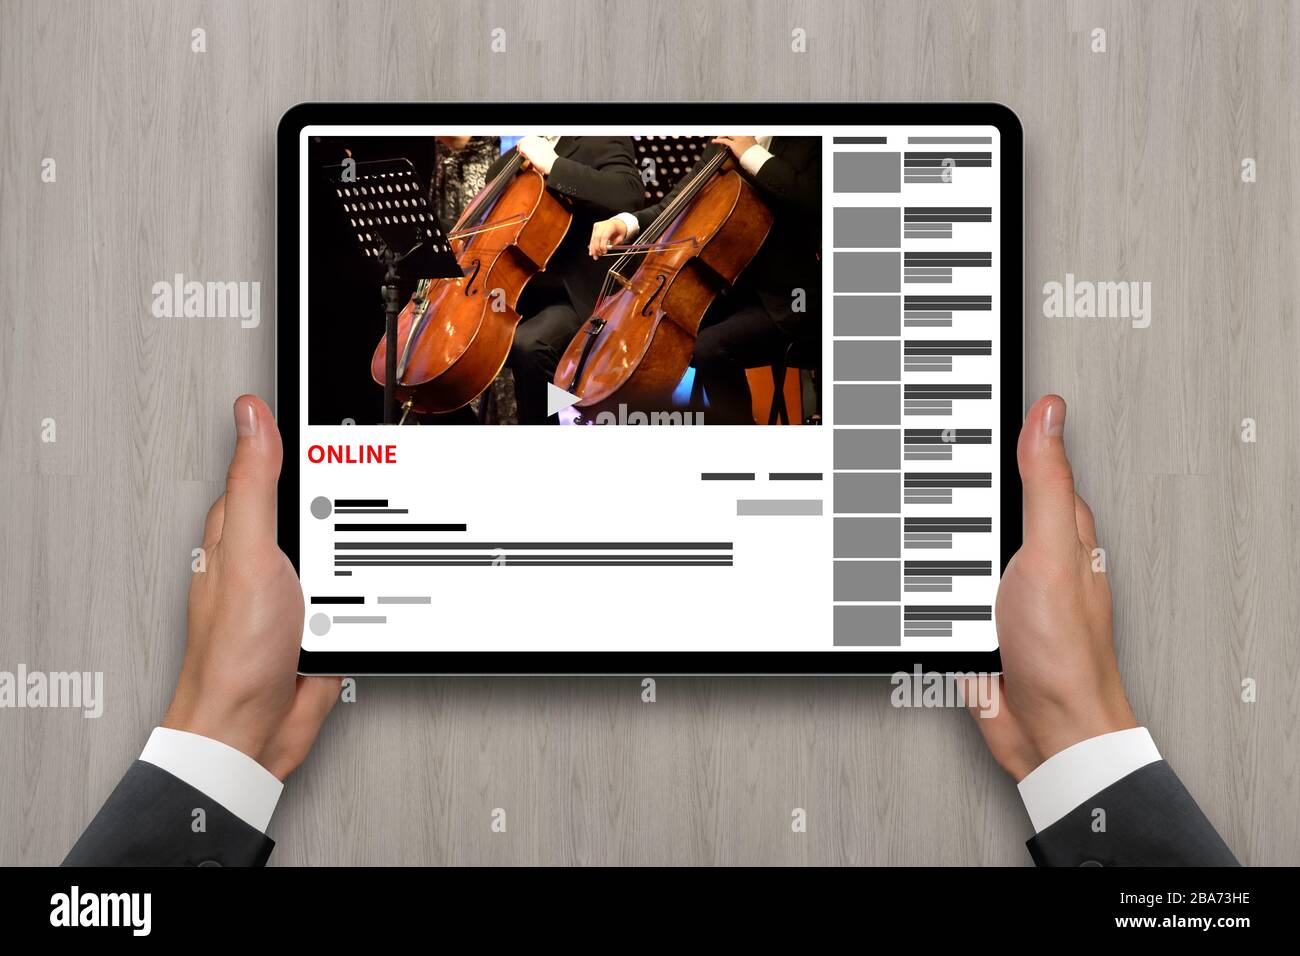 Online concert of classical music. Stock Photo